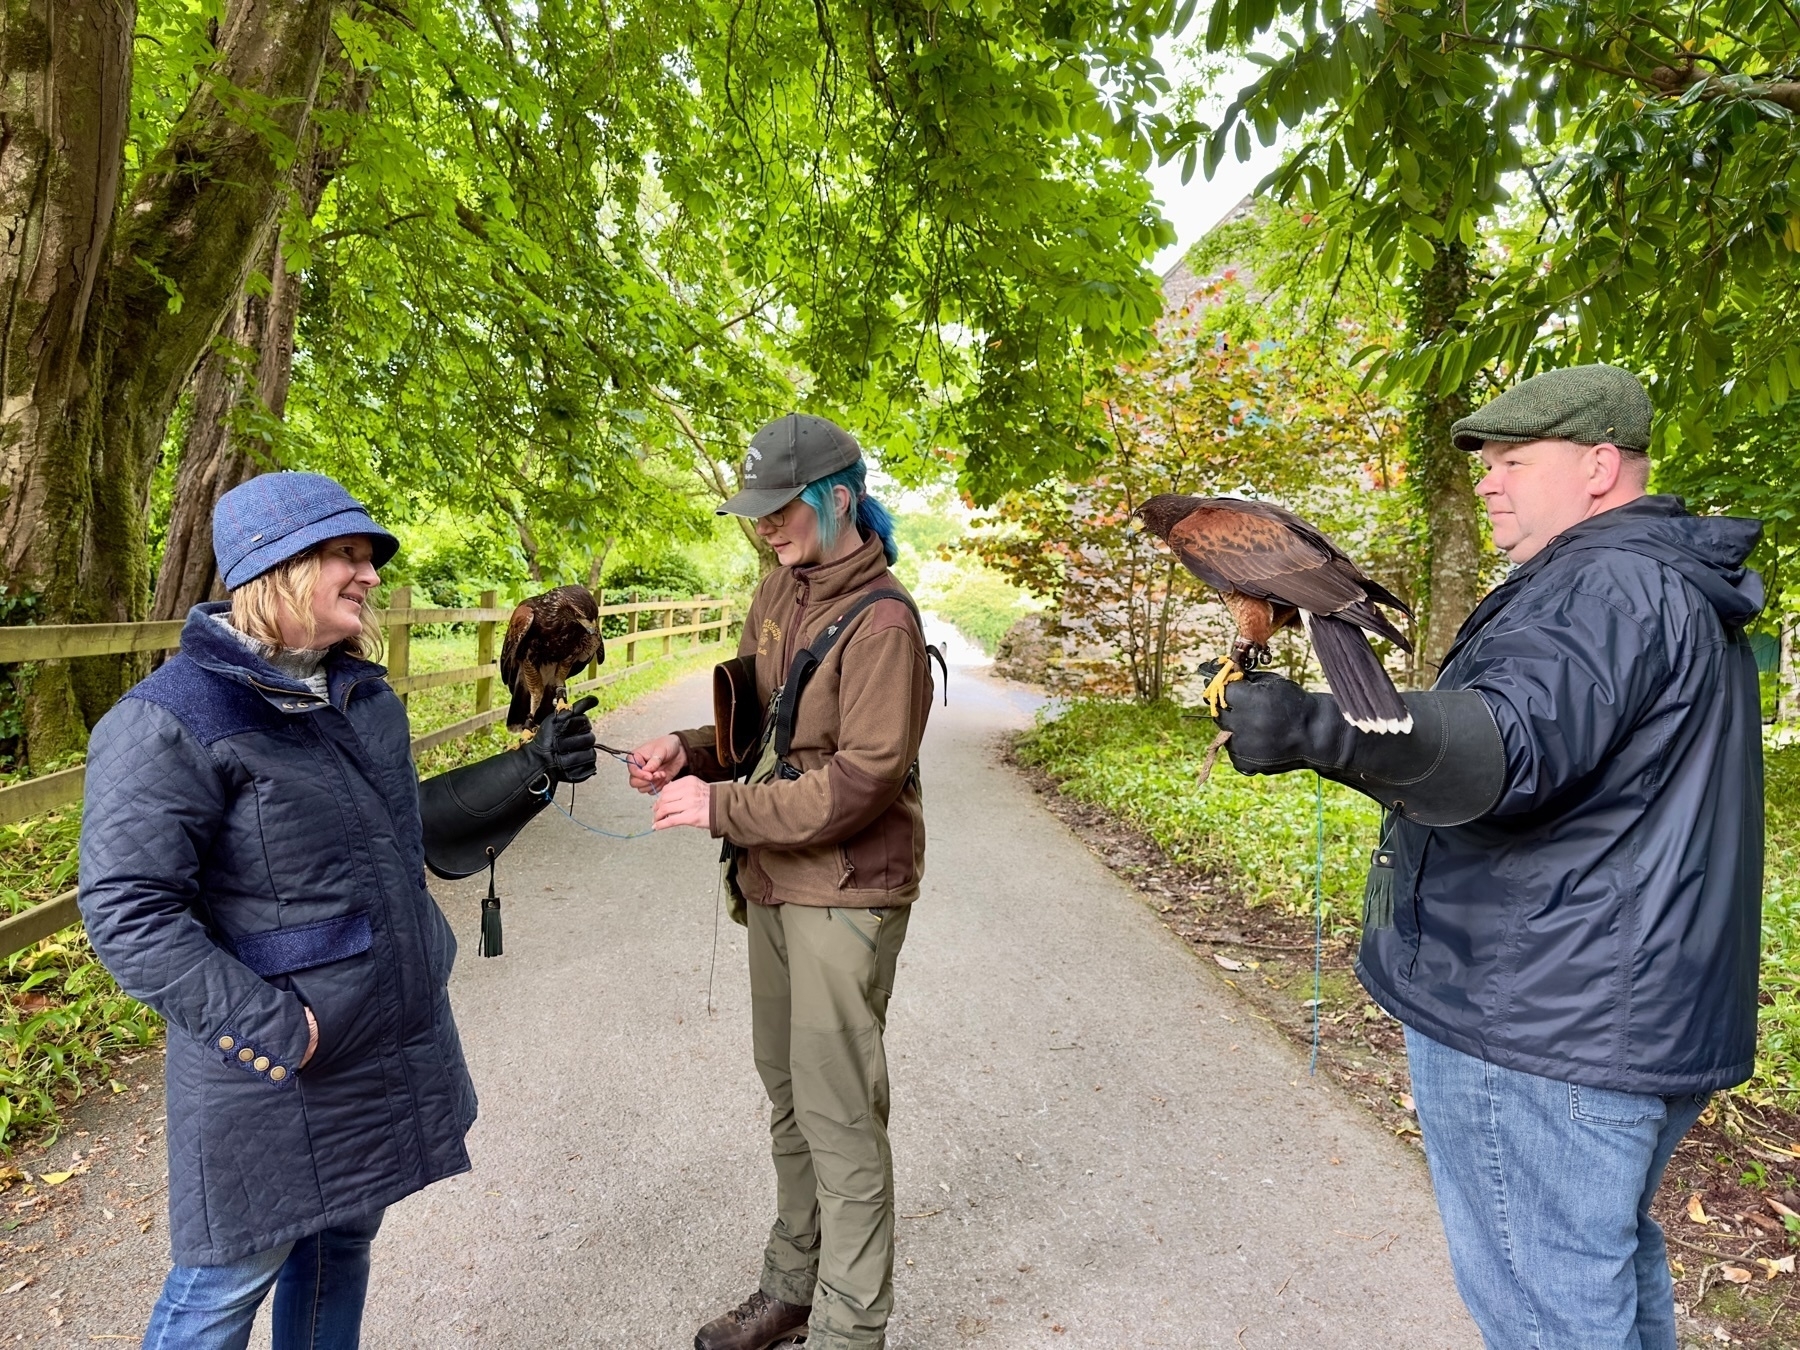 Auto-generated description: People are standing on a path surrounded by trees, interacting with birds of prey while wearing protective gloves.